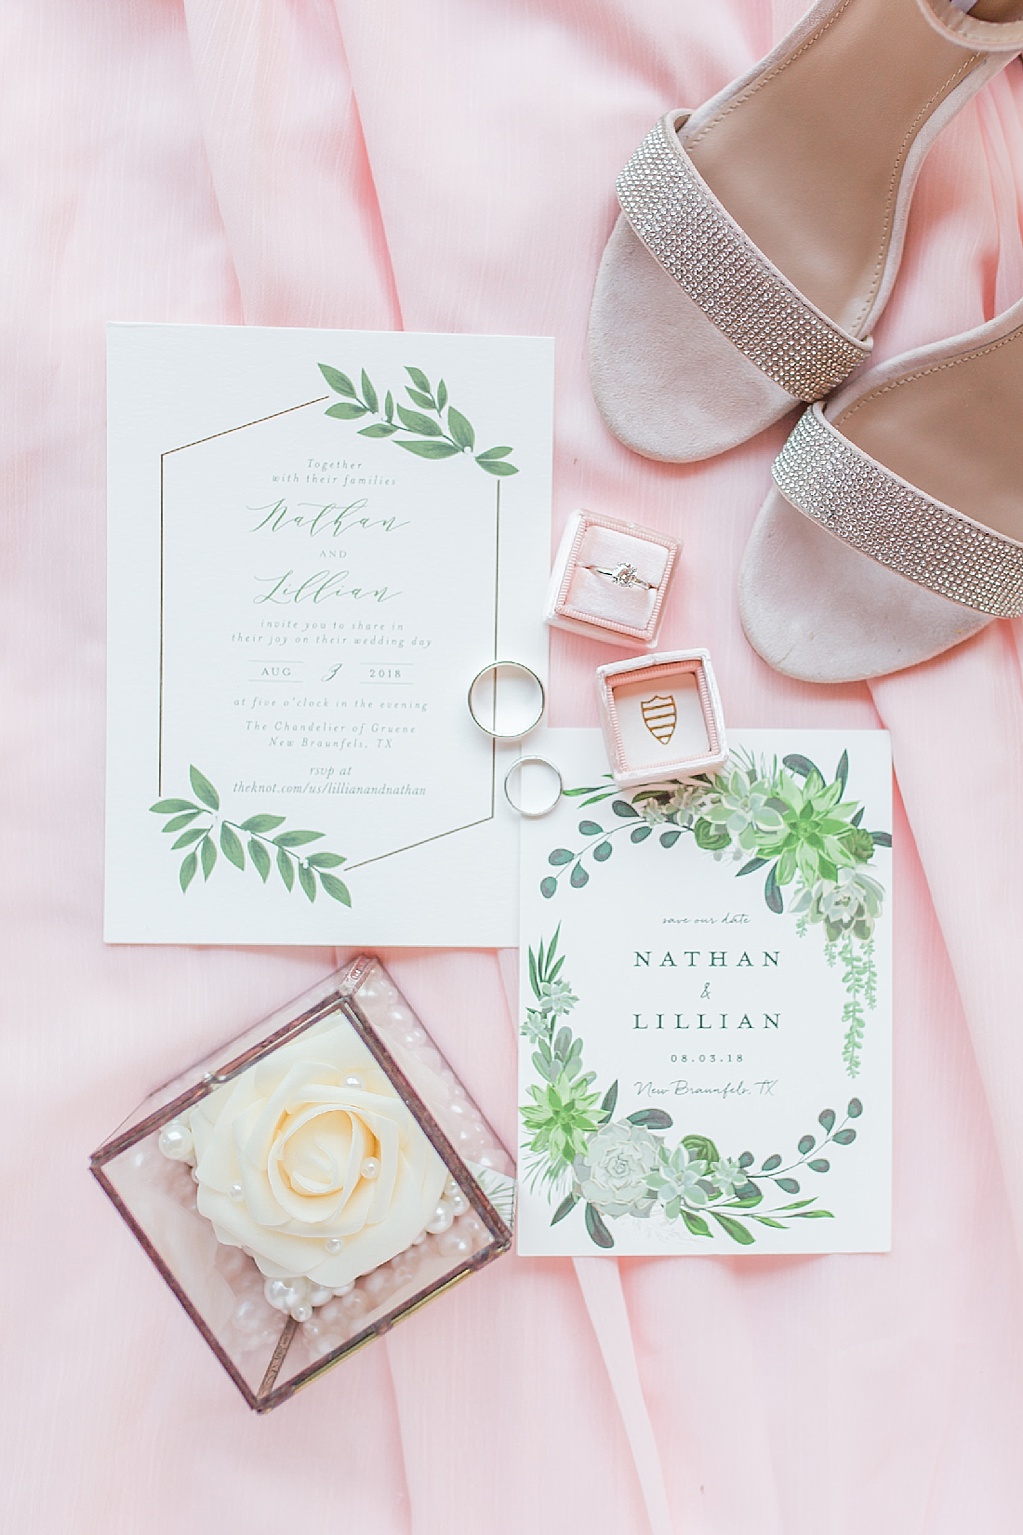 A Blush Vintage Summer Wedding at The Chandelier of Gruene in New Braunfels Texas by Allison Jeffers Photography 0008